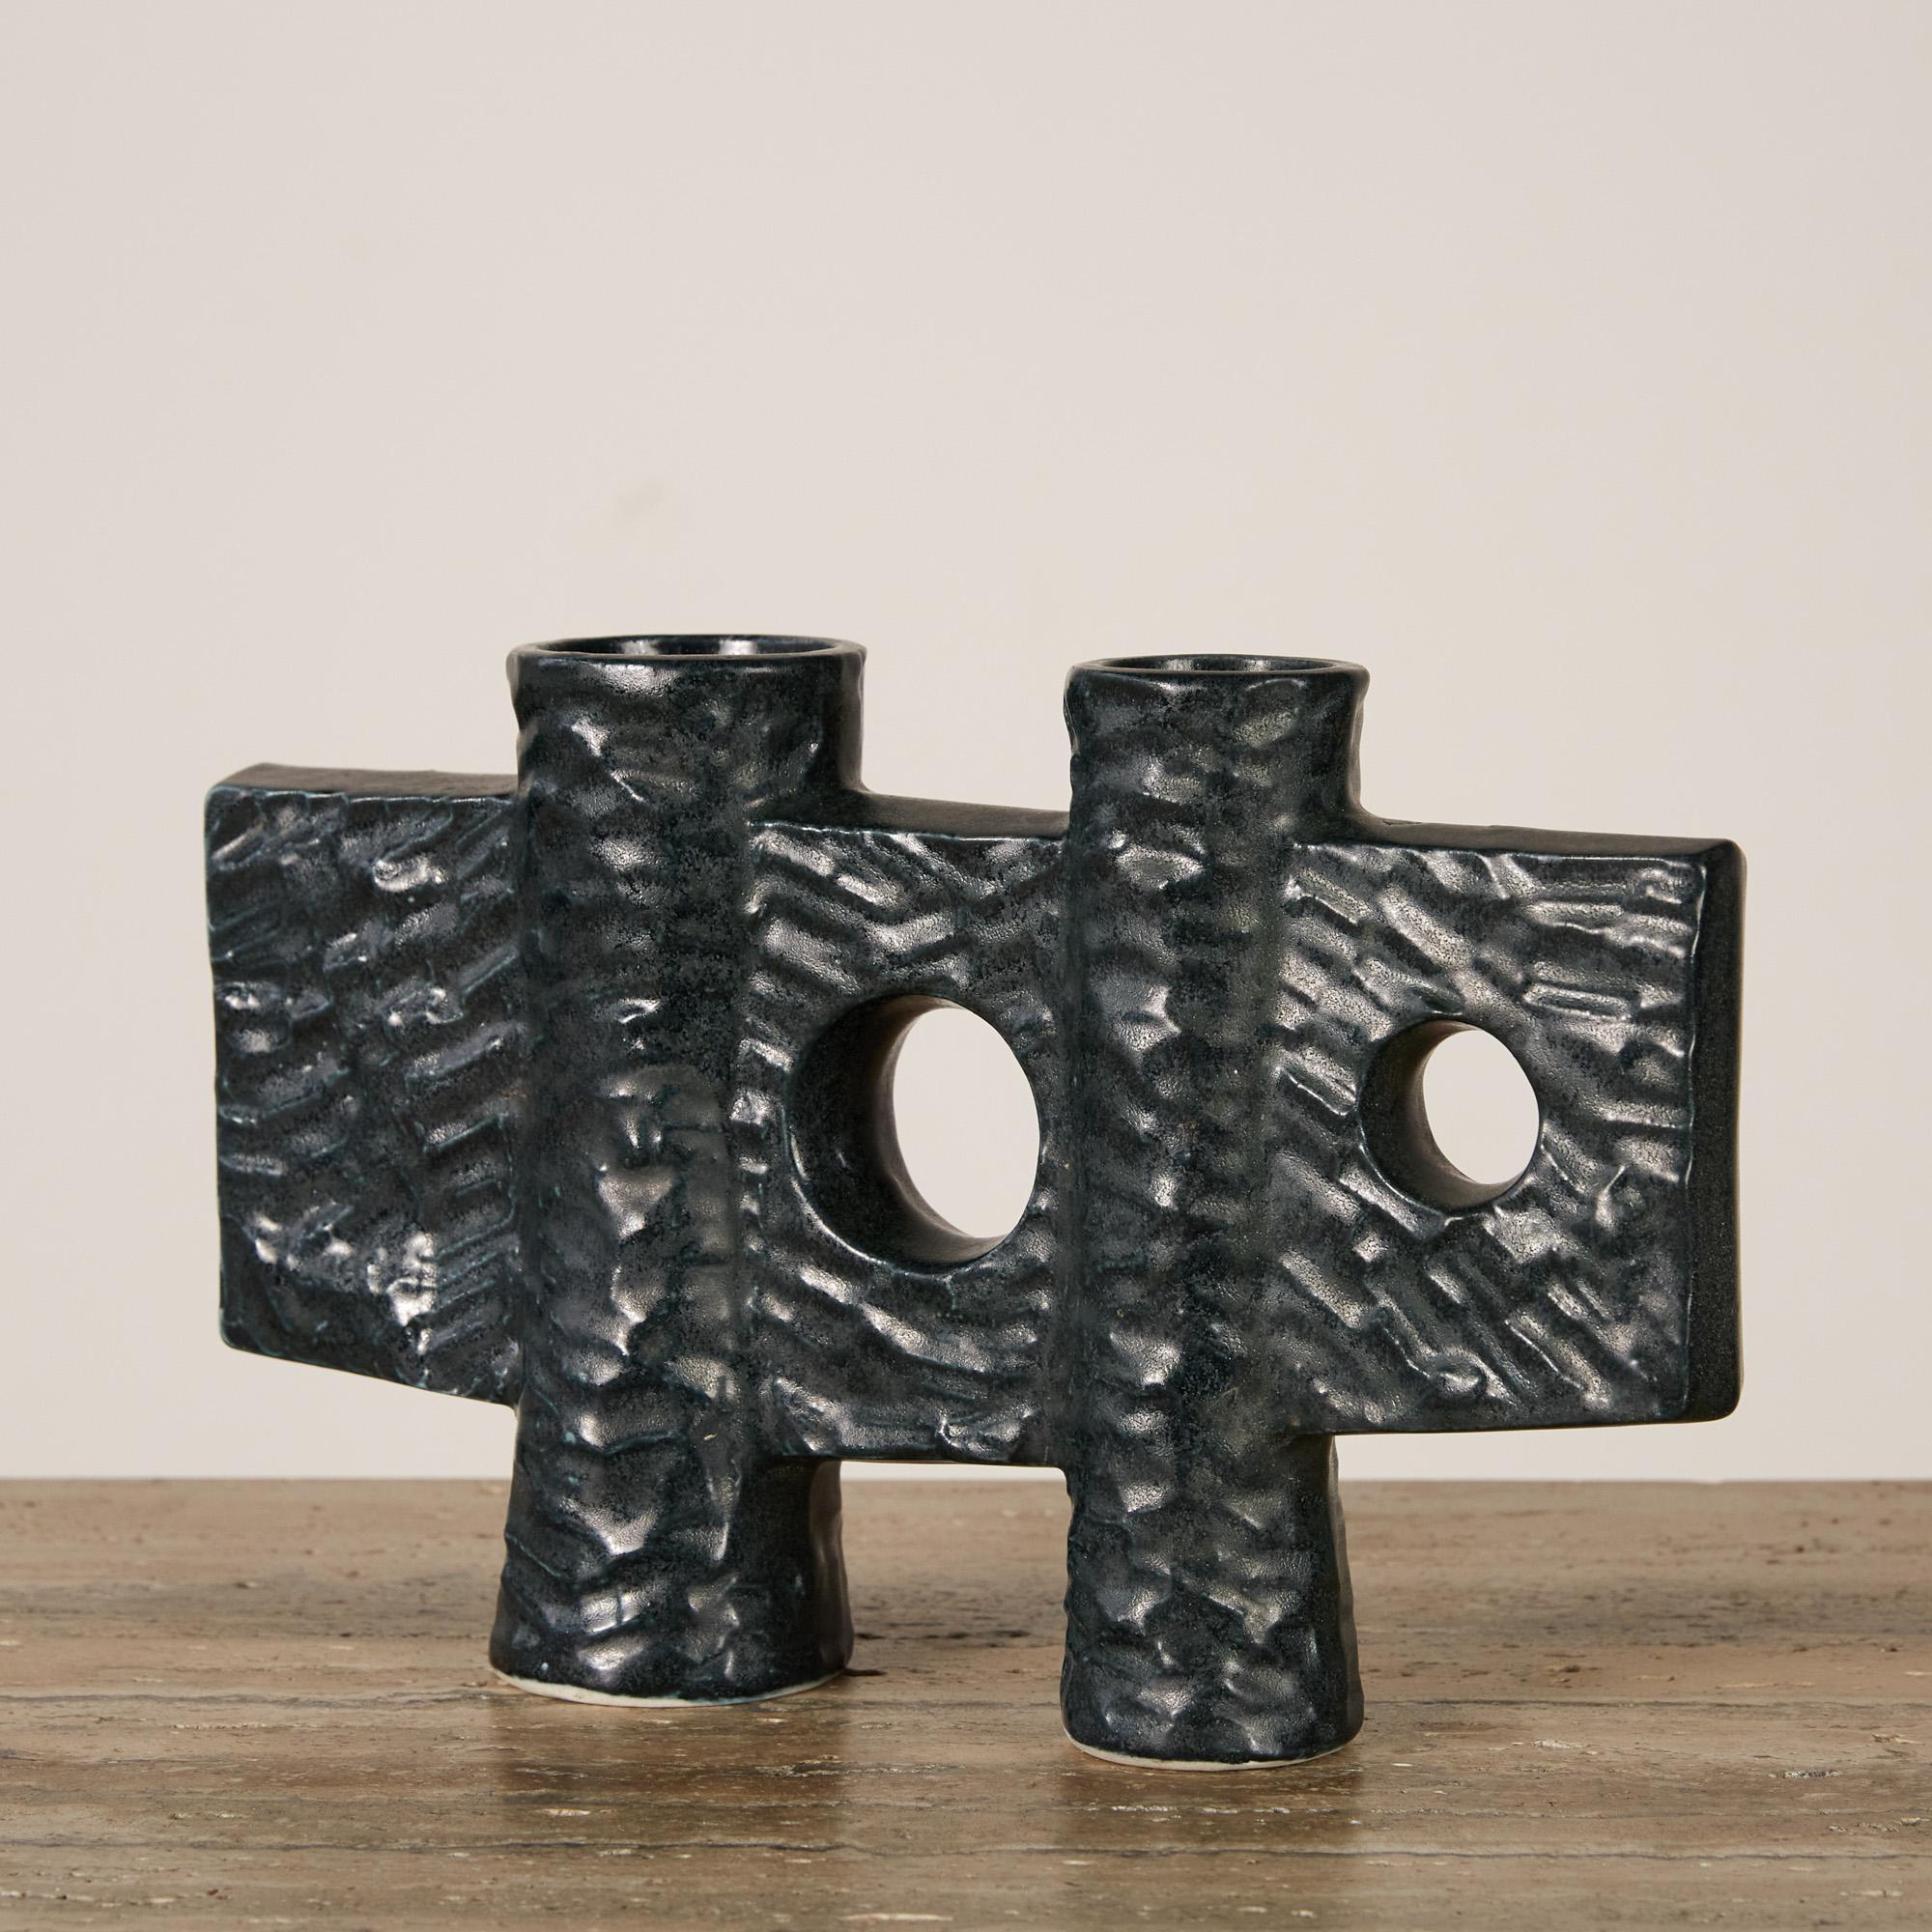 A unique piece of ceramic art that also serves as a vessel. It features a textured greenish-black glossy glaze with two cylindrical structures that are connected by a flat vertical rectangular form with round cutouts in the center Perfect for